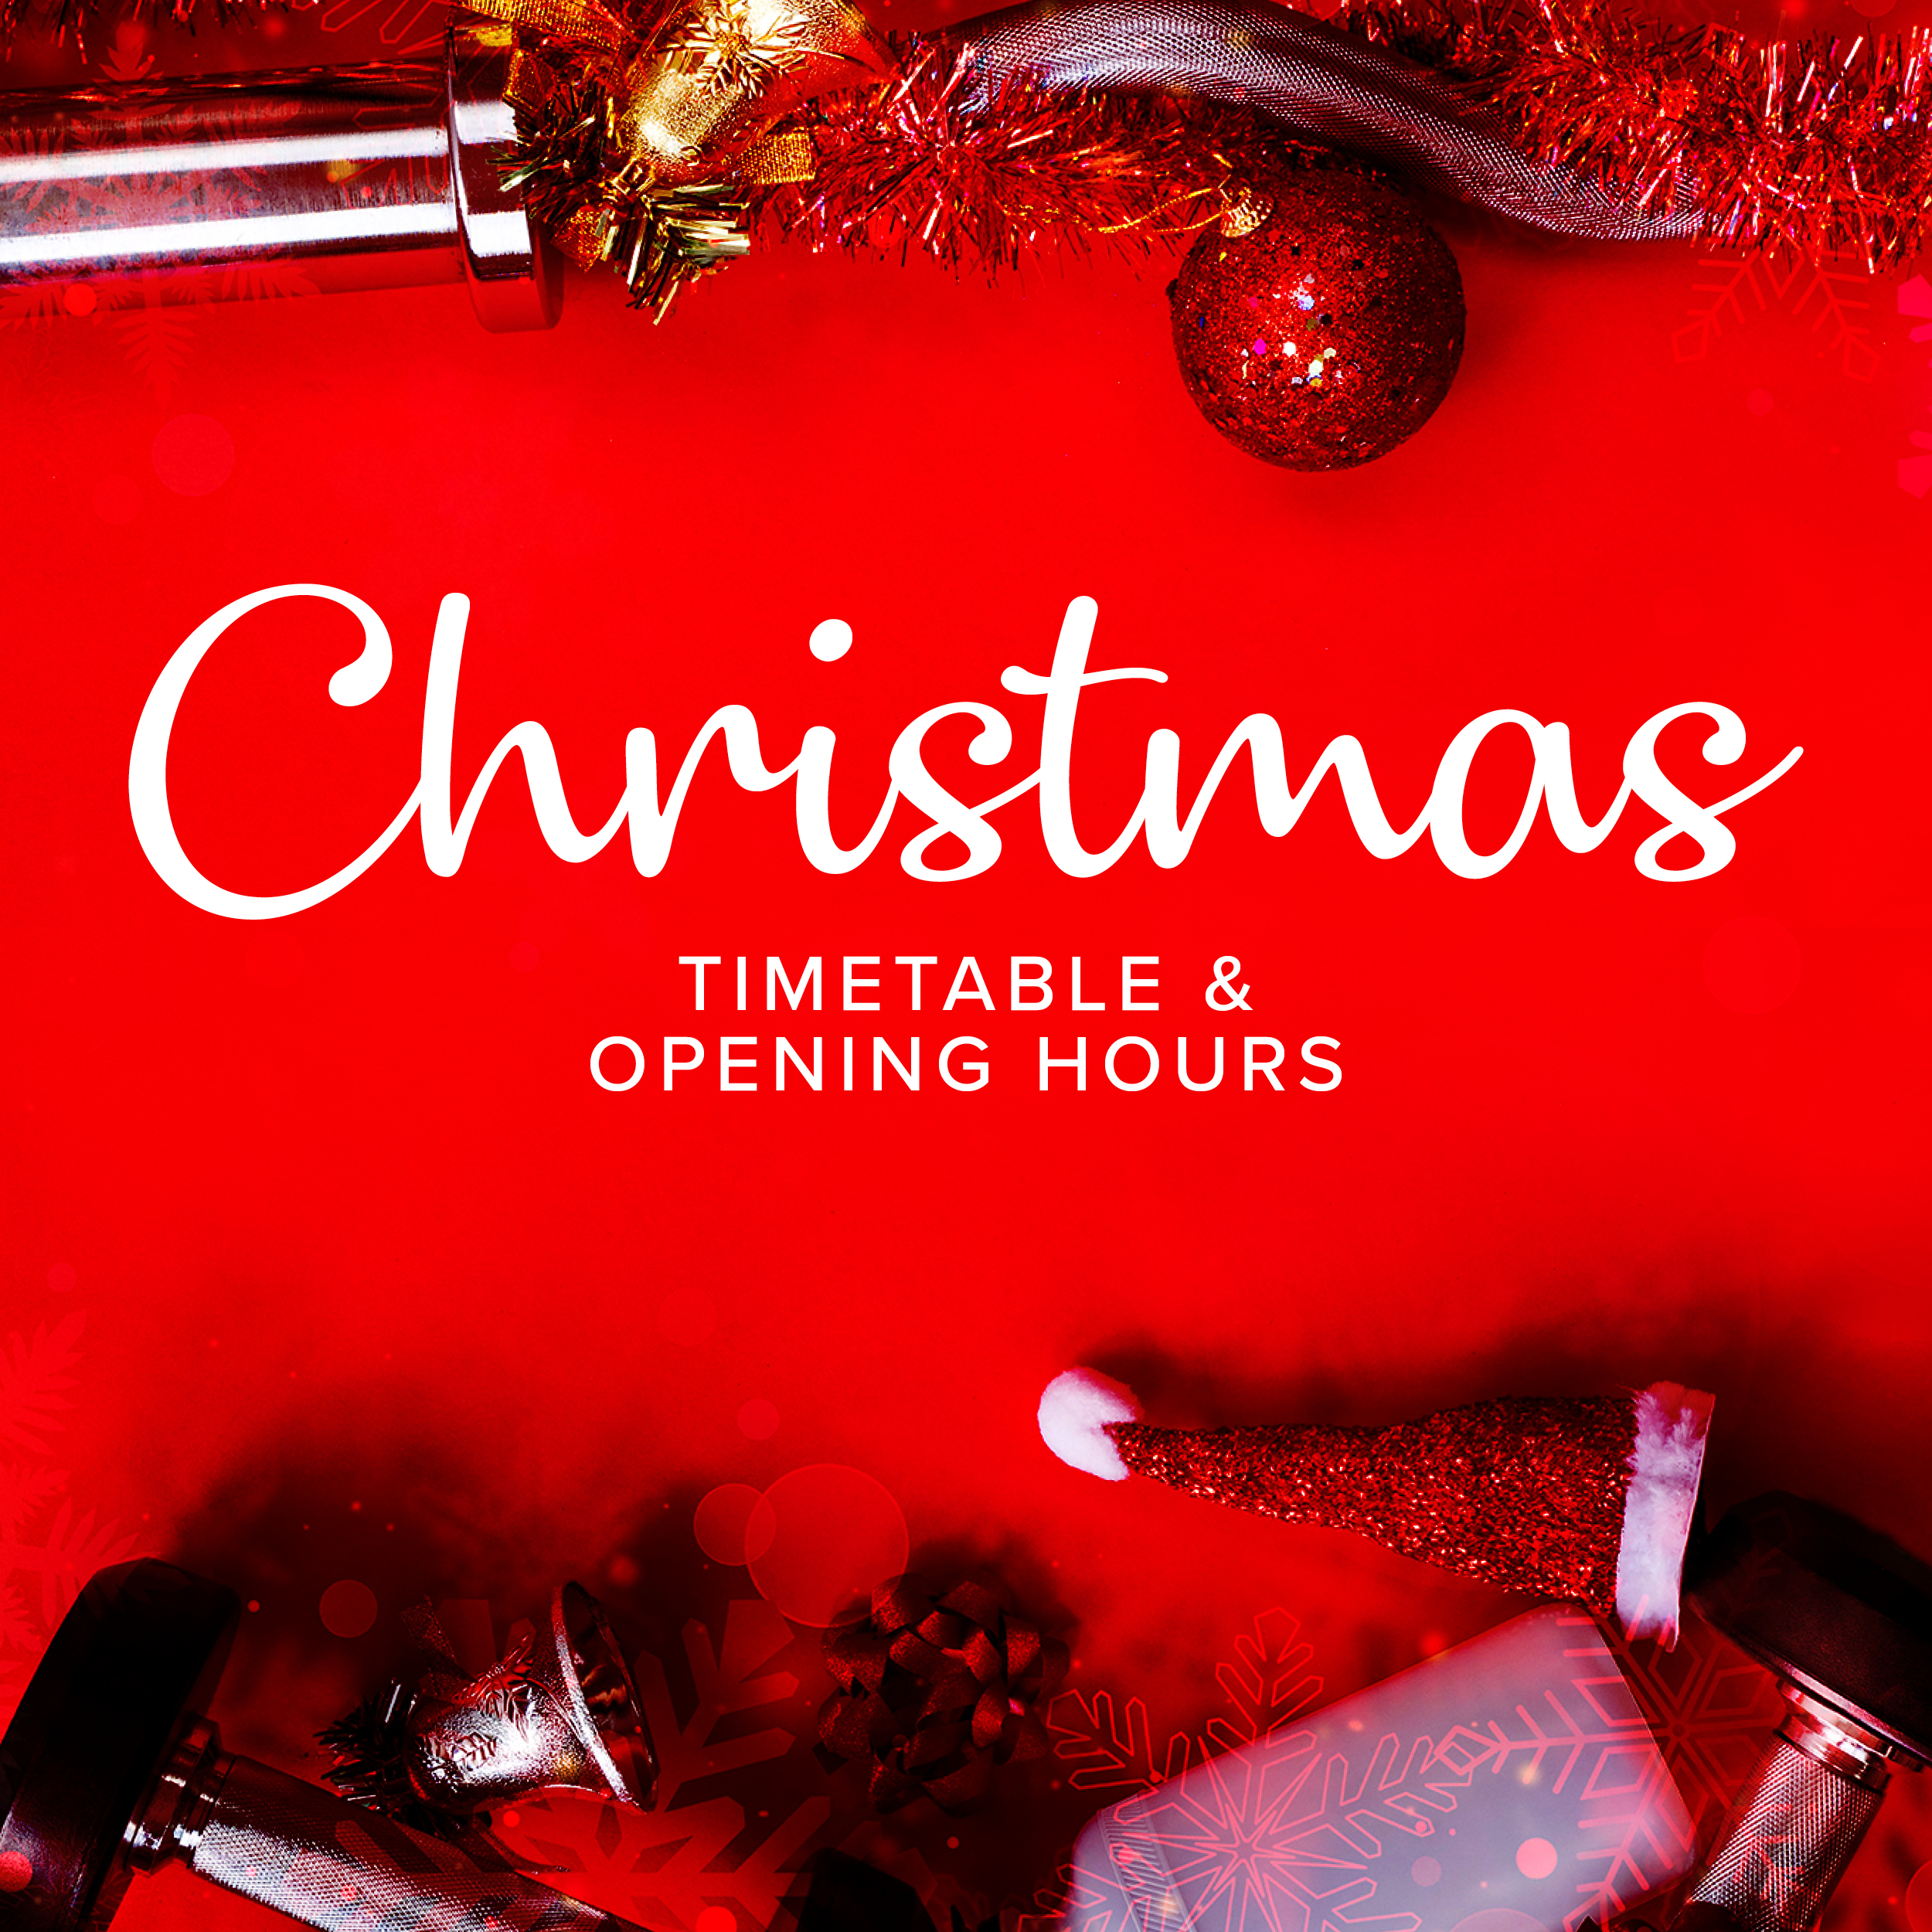 Christmas Timetable & Opening Hours